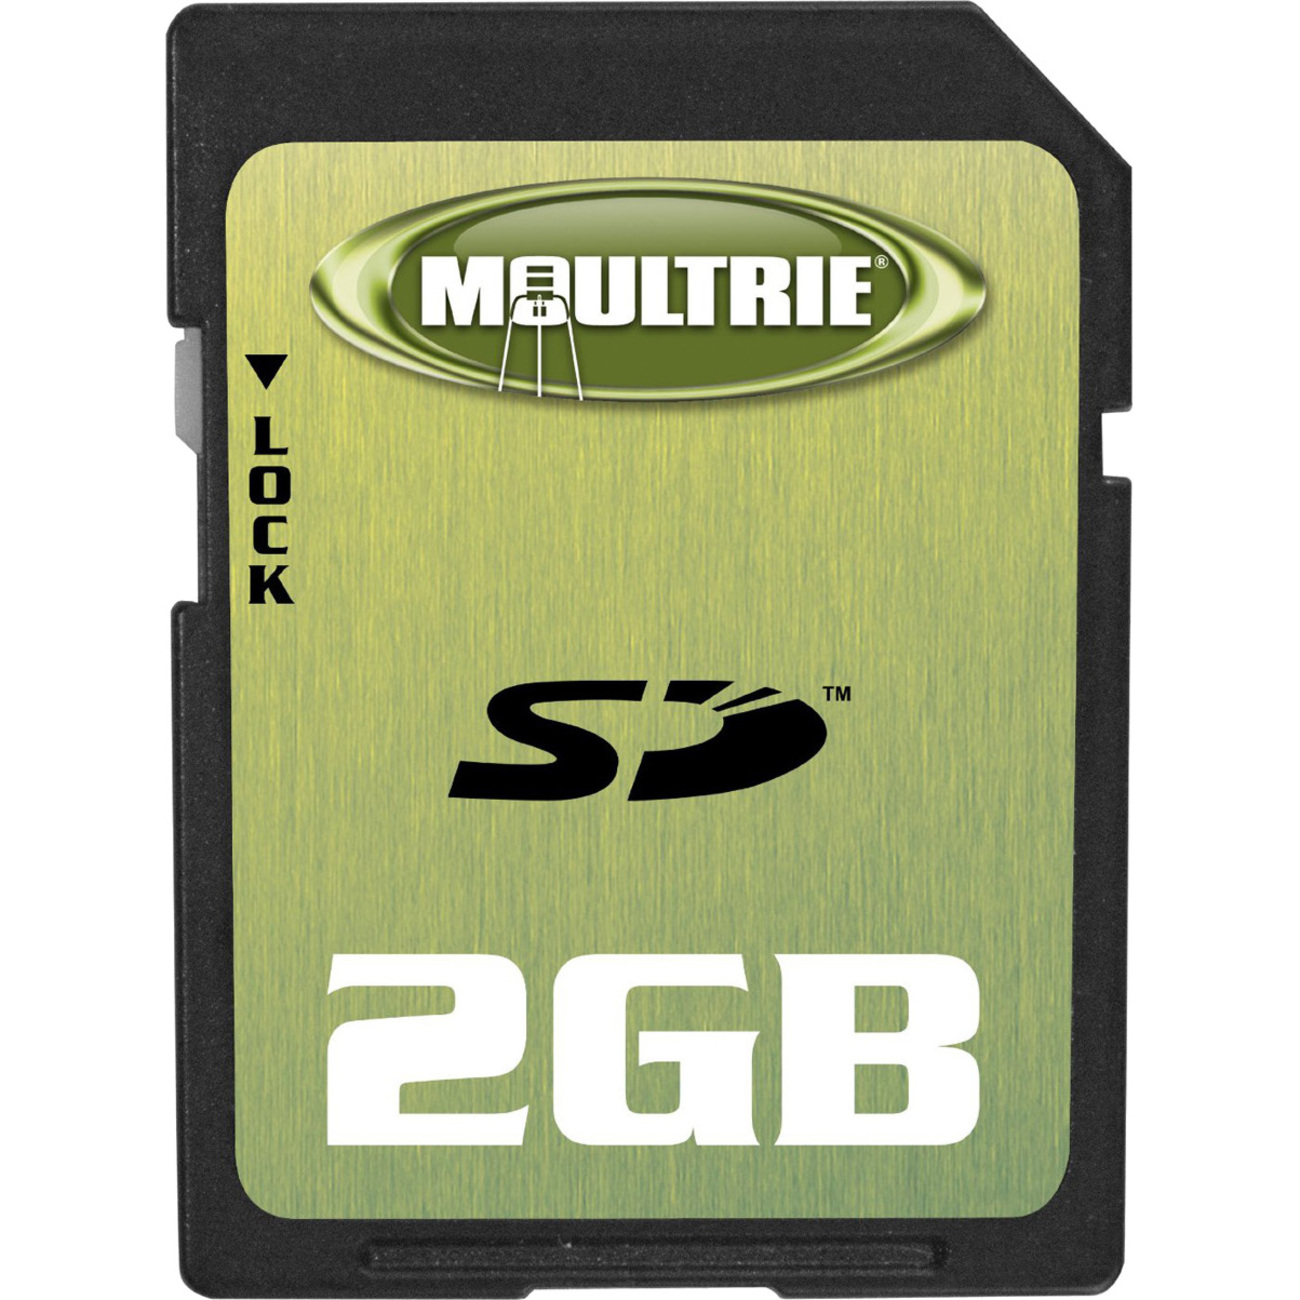 Moultrie 2GB SD Card